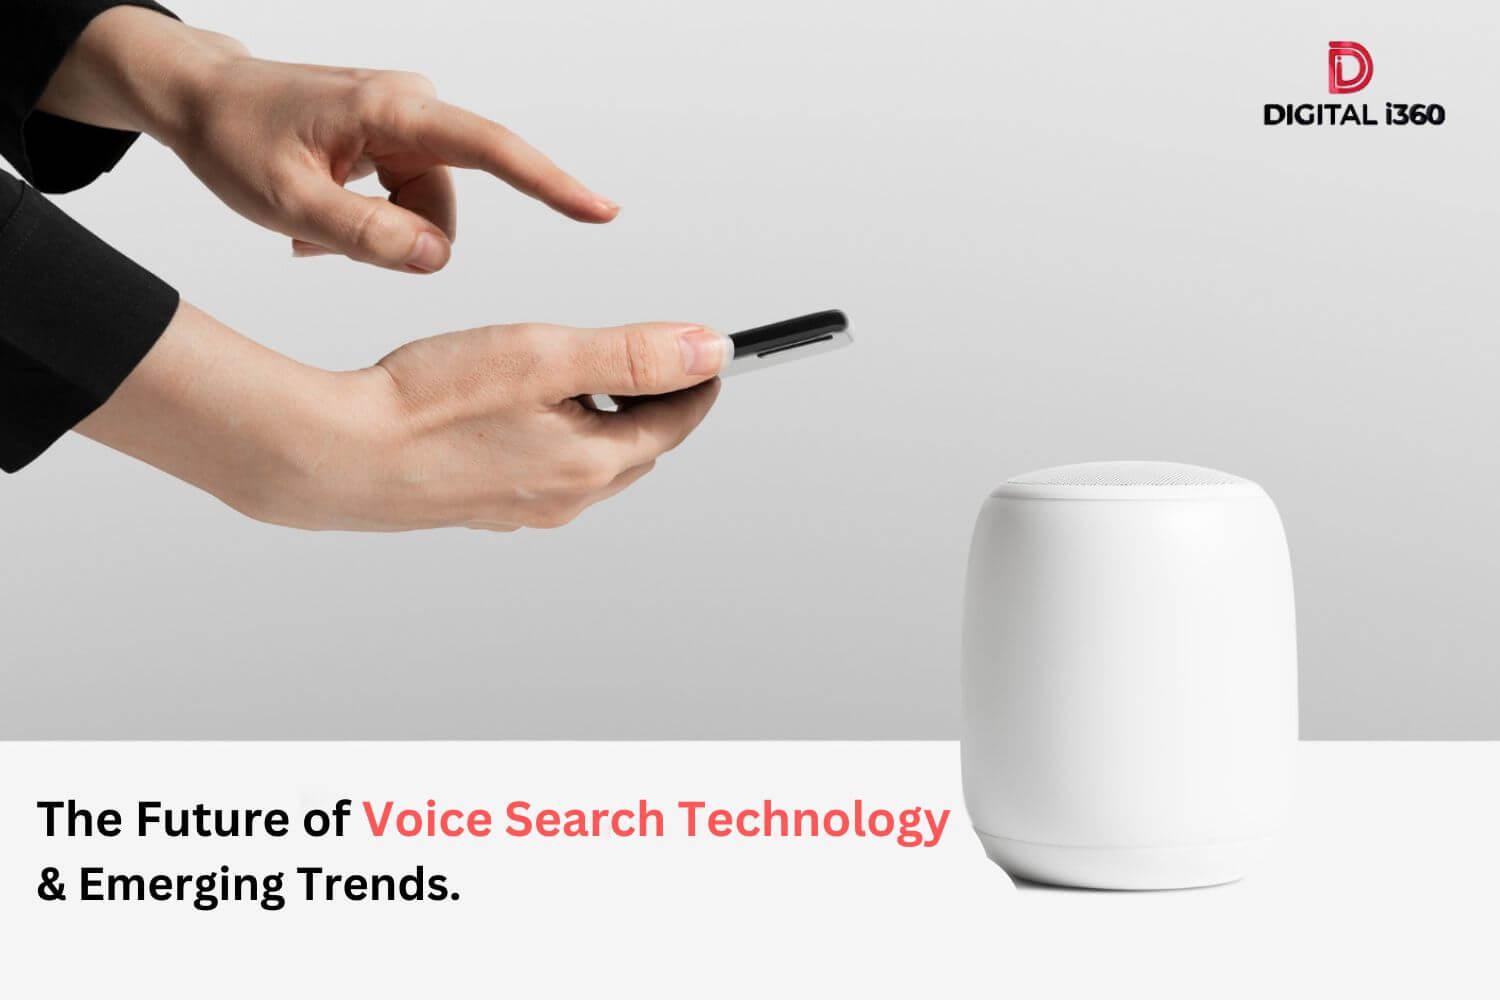 The Future of Voice Search Technology & Emerging Trends blog